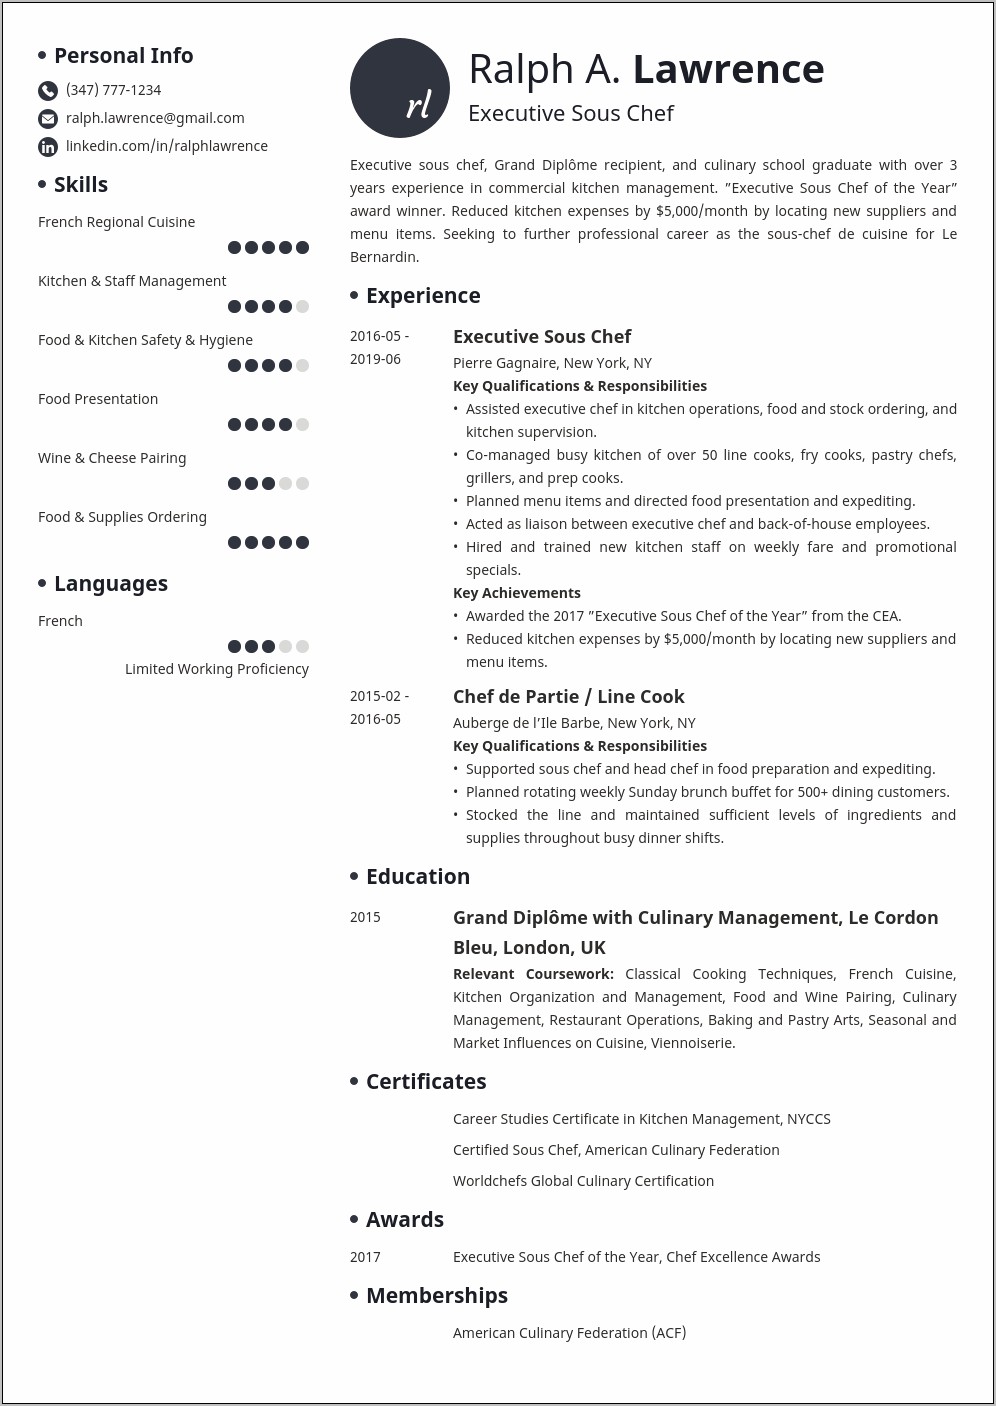 Sample Resume Sous Chef Position